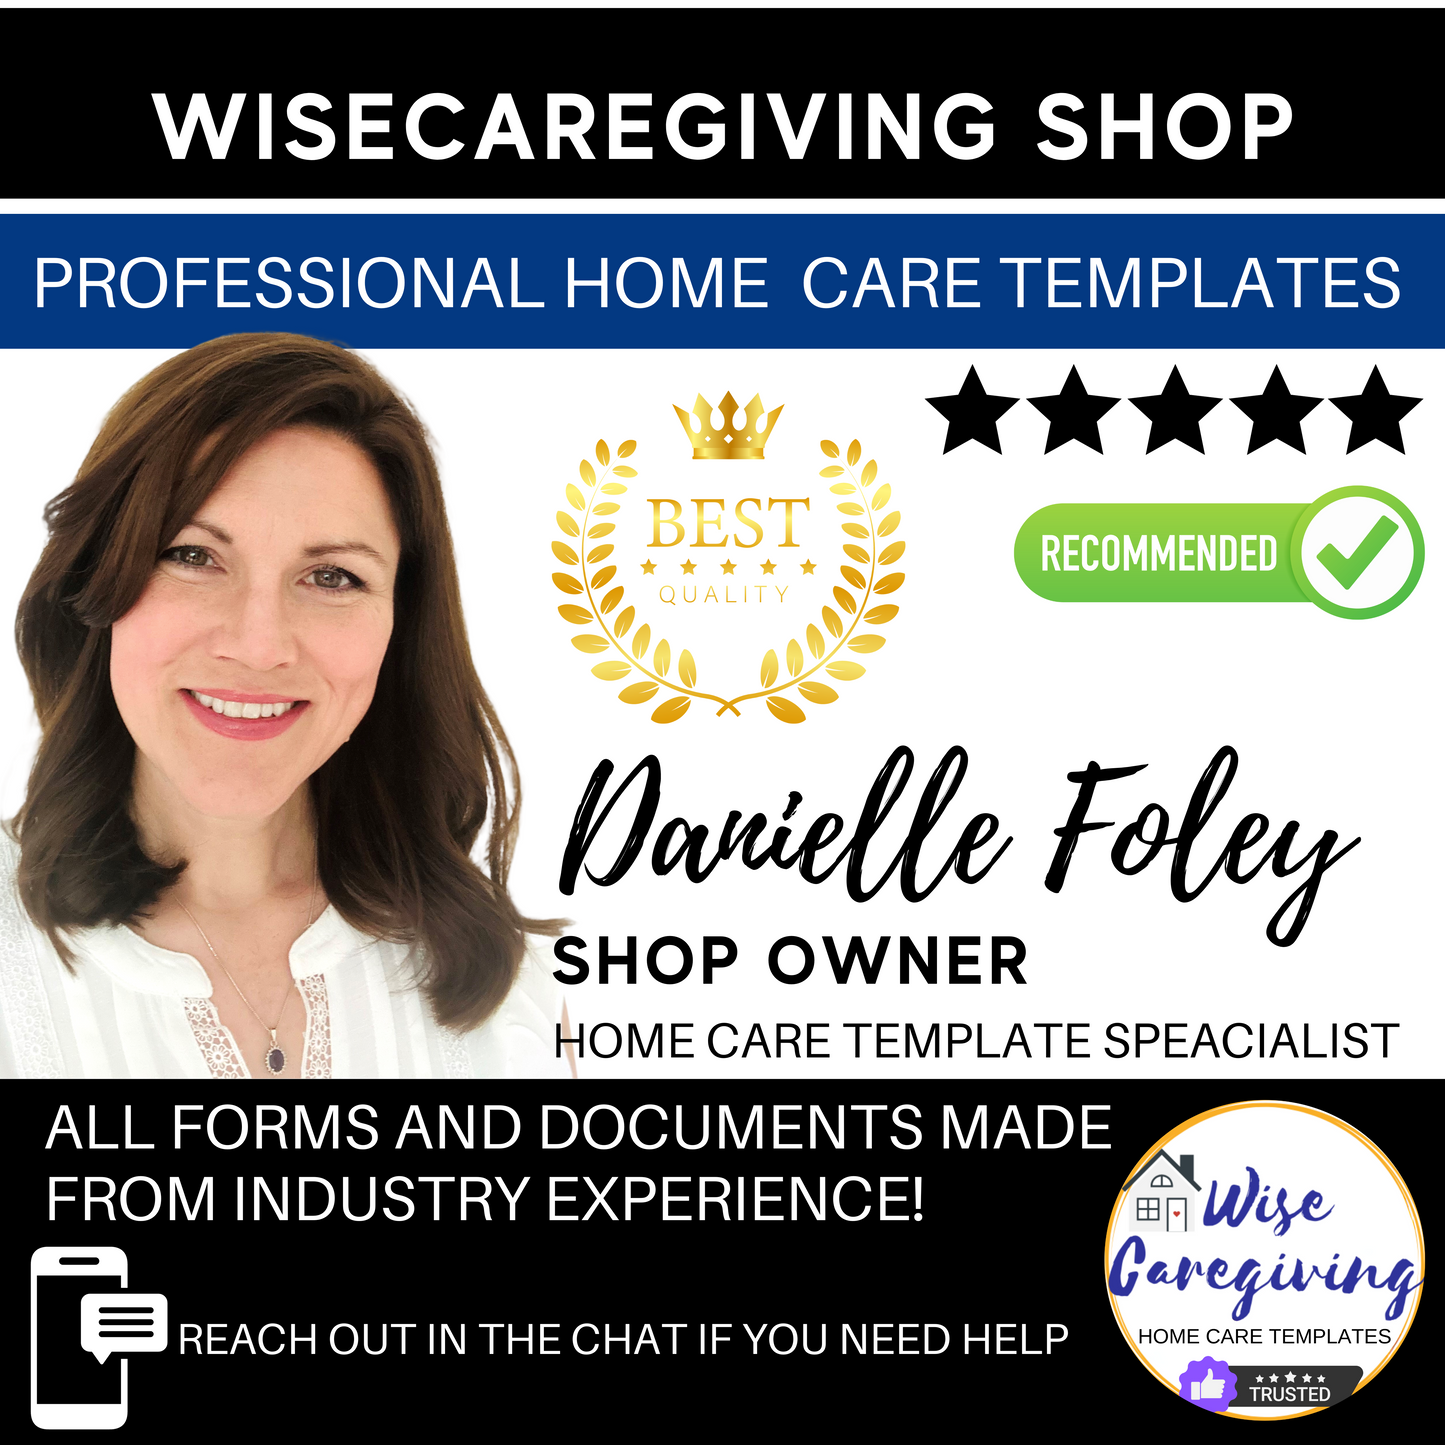 Home Care Plan for Certified Caregivers